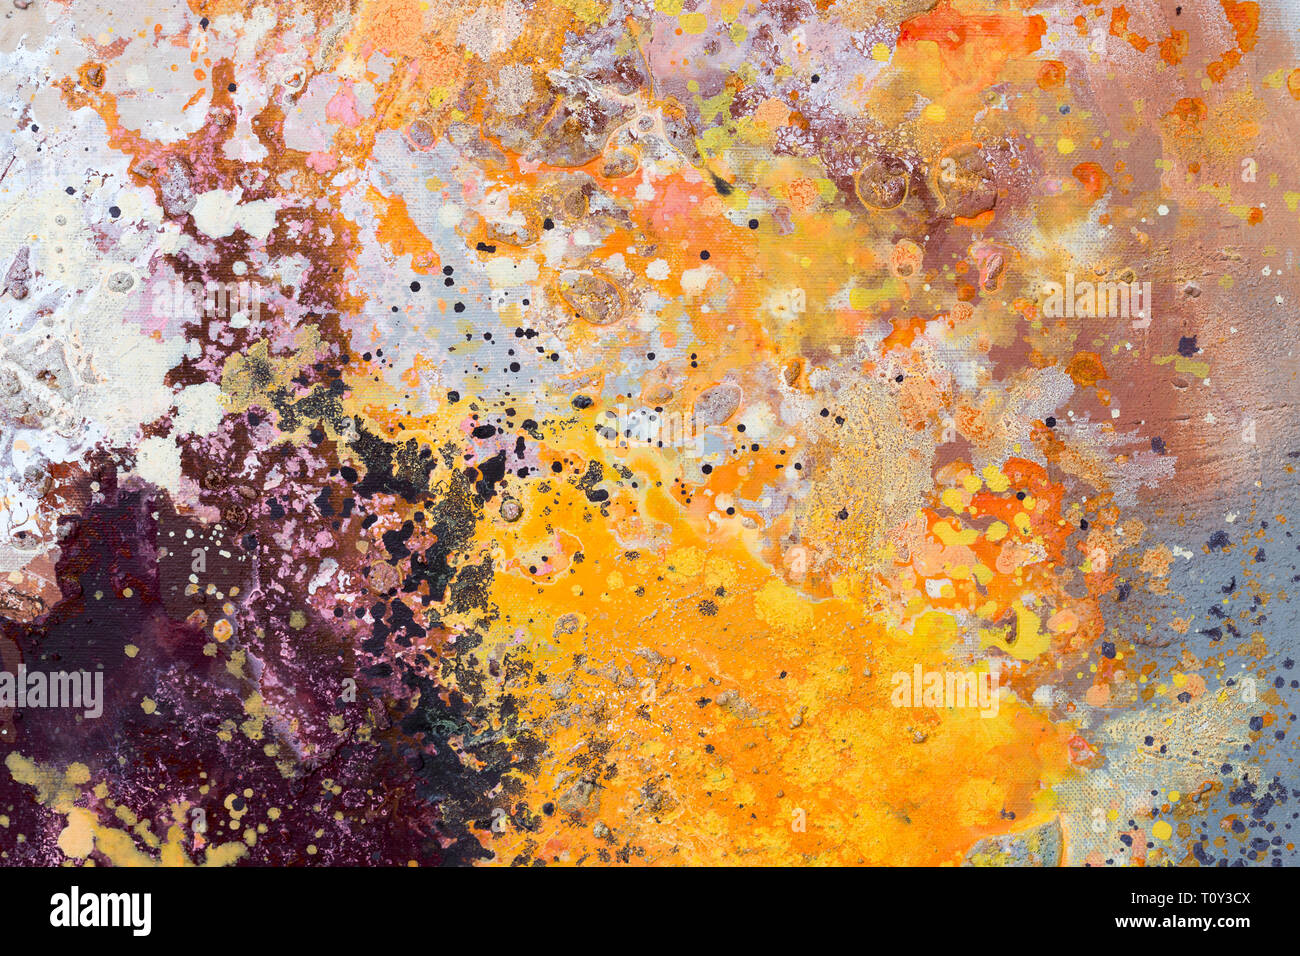 Abstract art - hand painted canvas. Artists oil paints multicolored closeup abstract background. Stock Photo